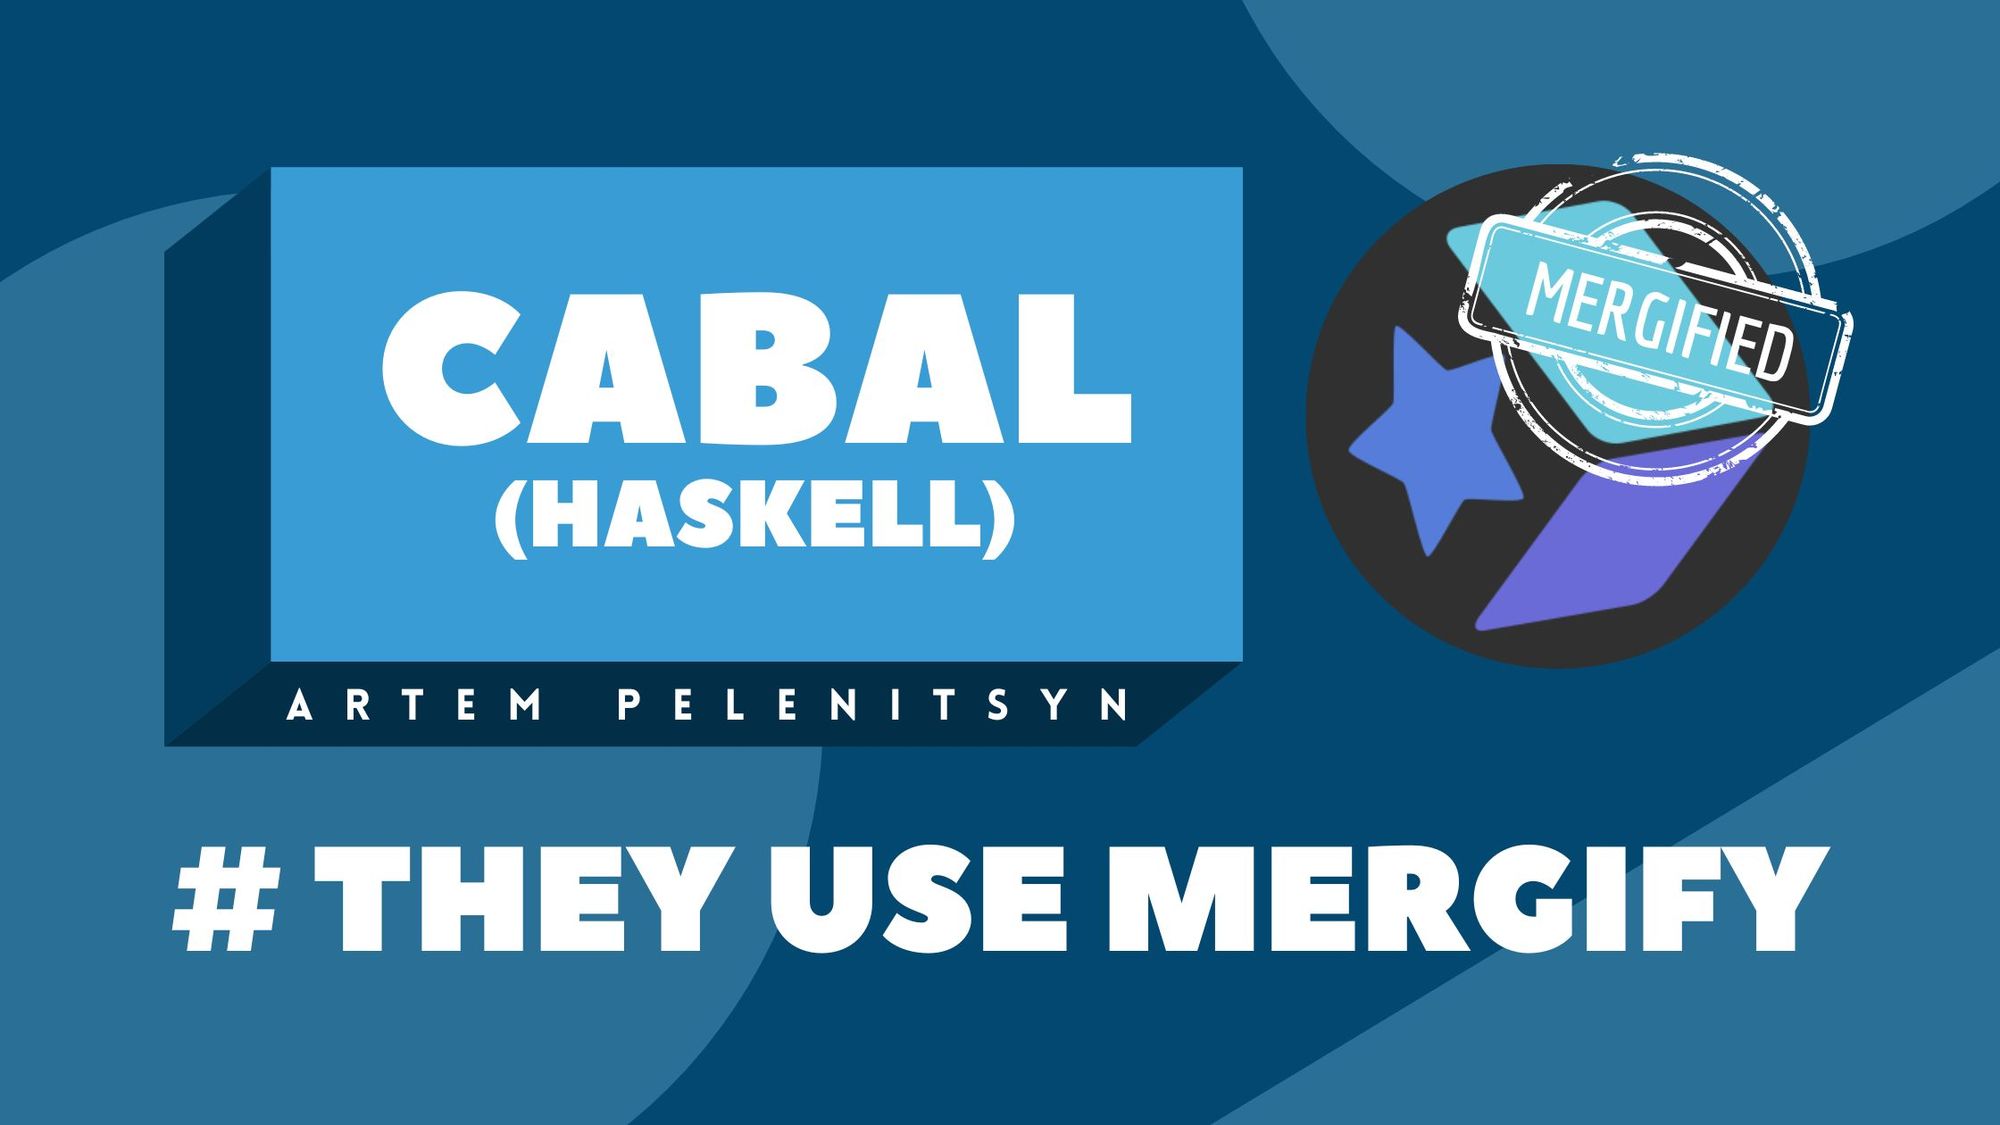 They use Mergify: Cabal (Haskell)